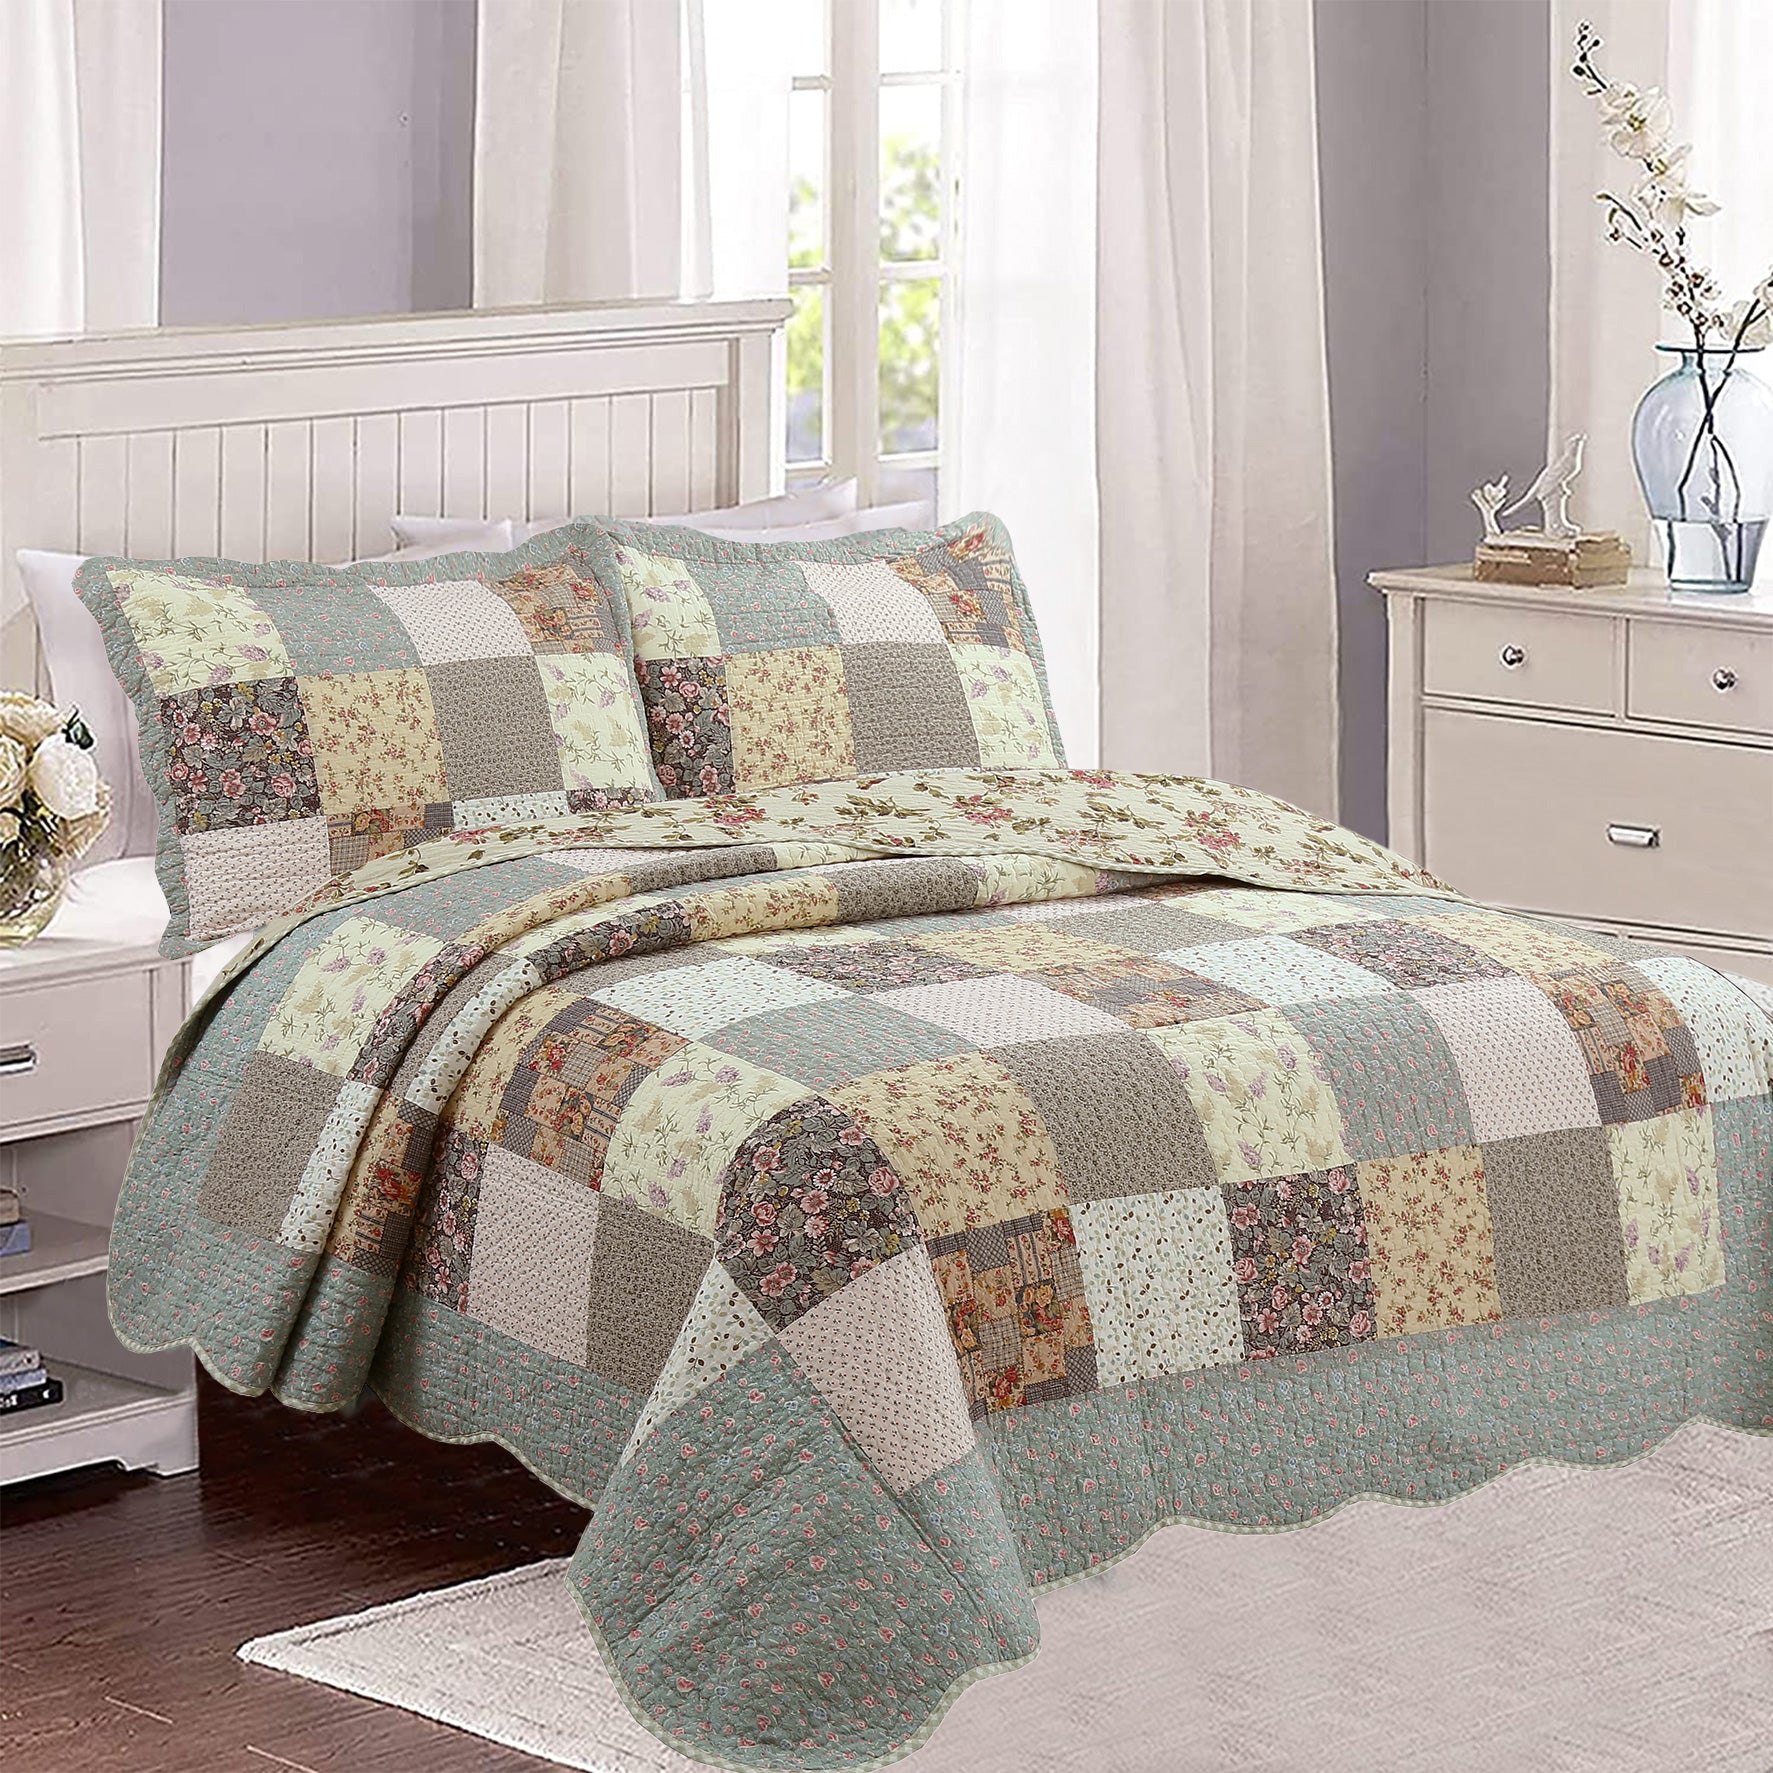 Girlish Style Cute Bedding Sets With Red Bow Pattern Includes Duvet Cover,  Pillowcase, Quilt, And King Size Blanket 220x240 And 200x200 From  Davidwesley, $29.47